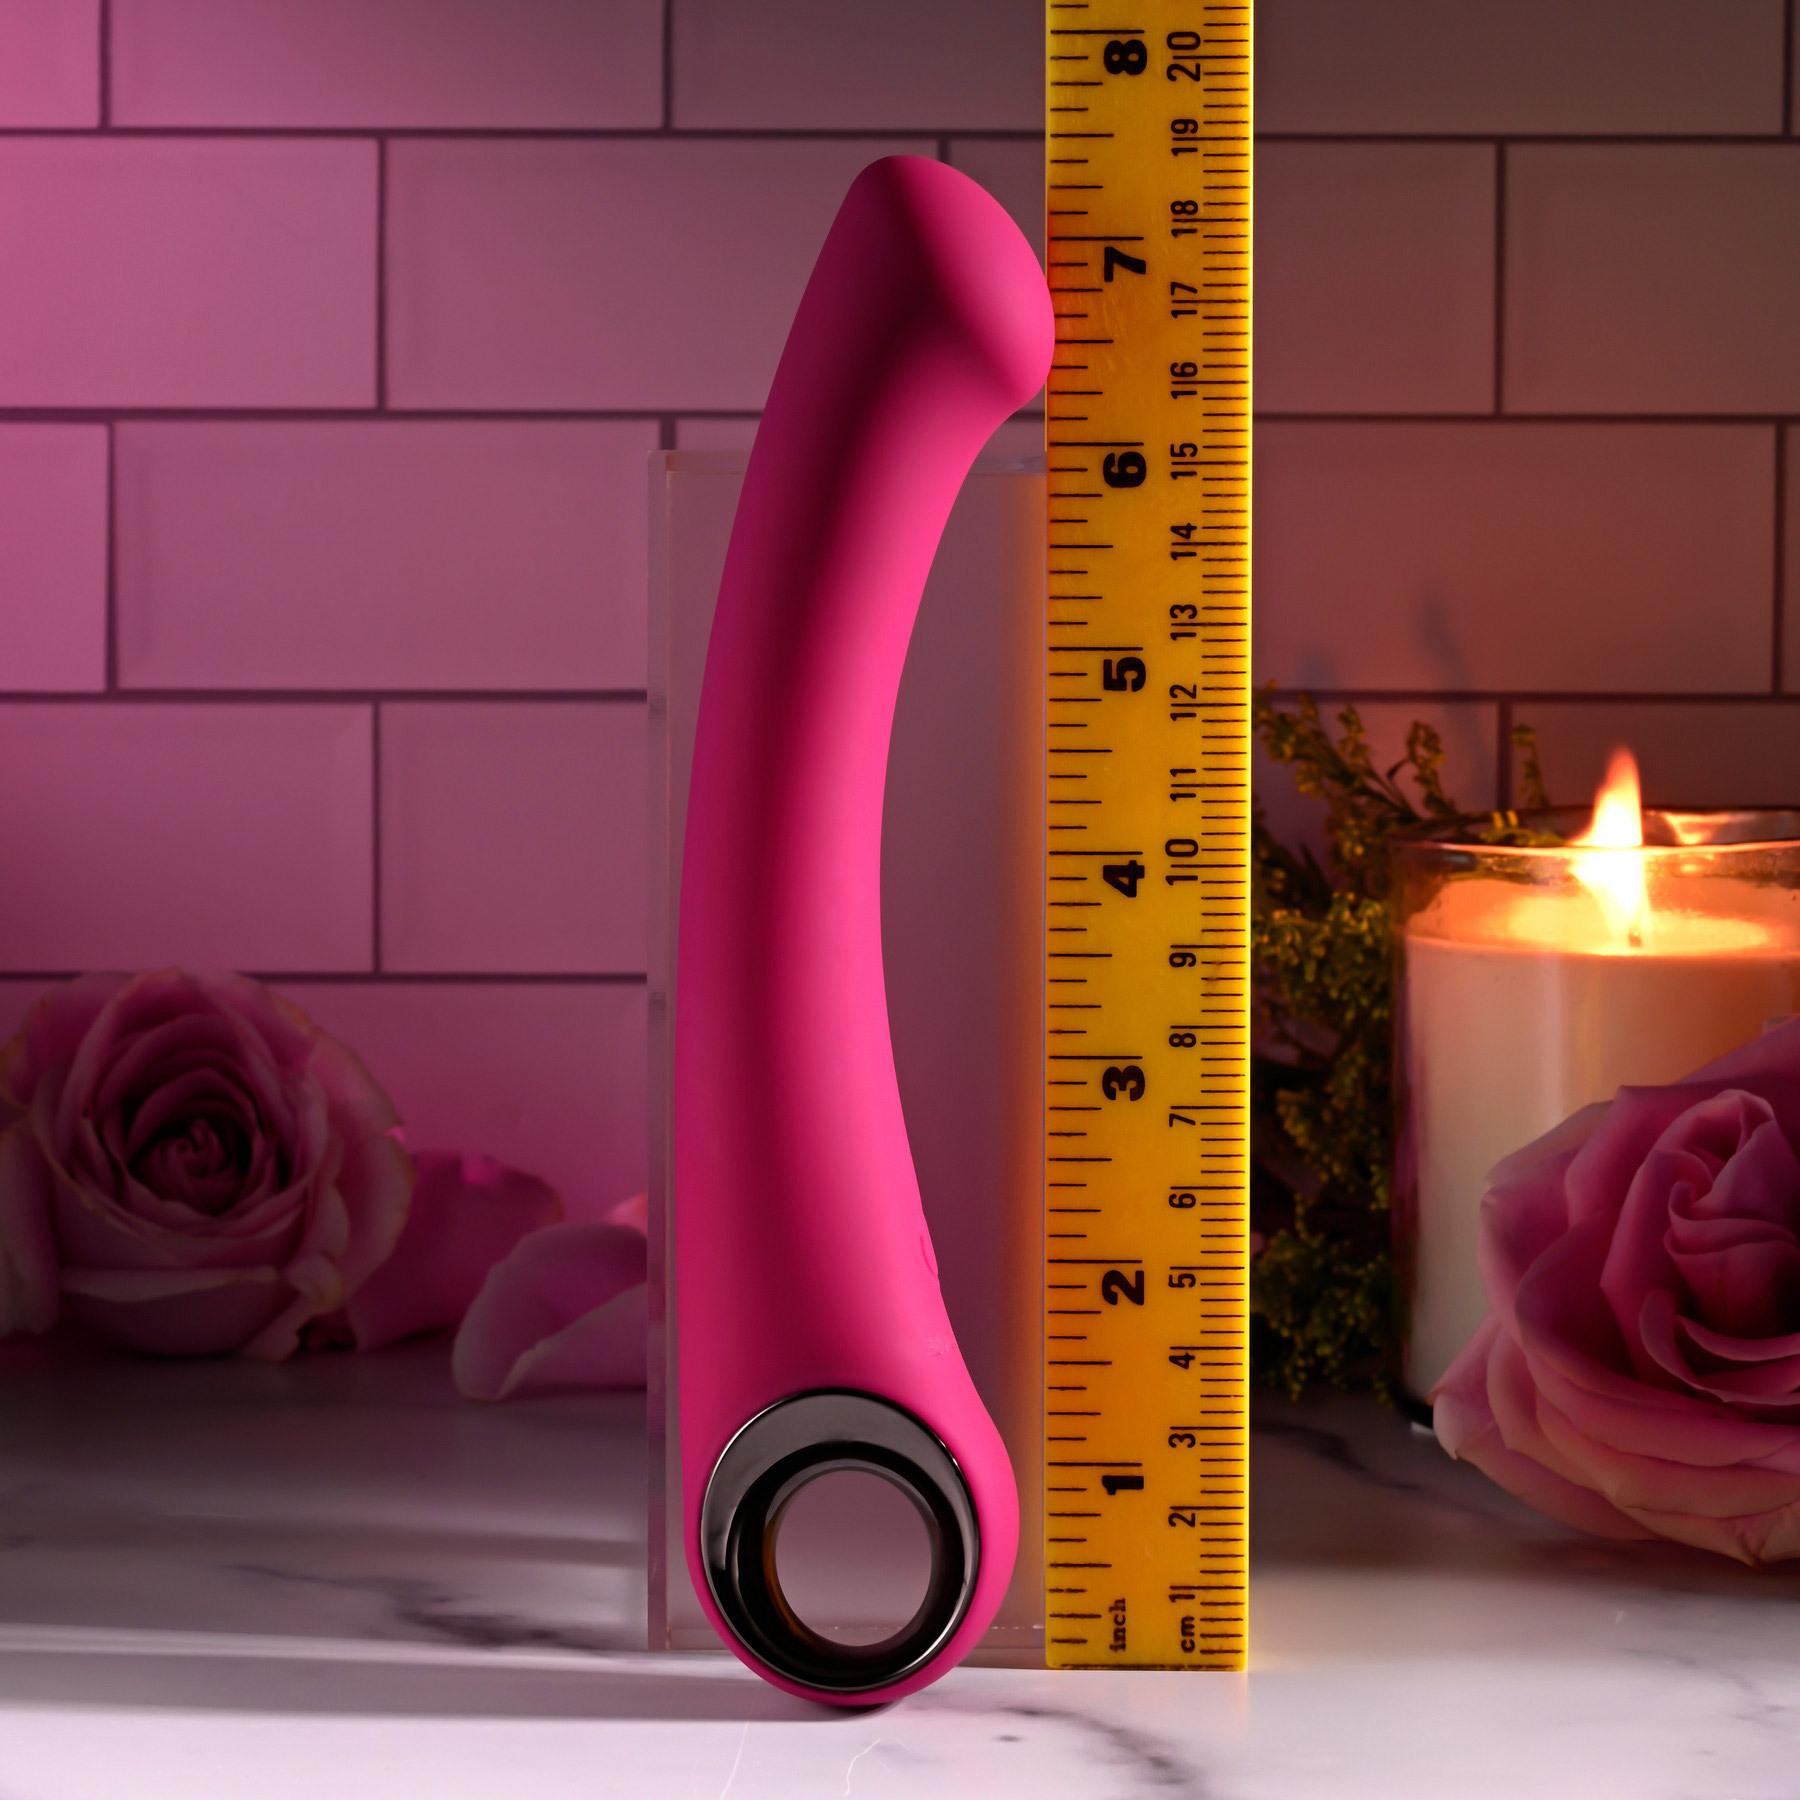 Pleasure Curve Rechargeable Waterproof Silicone G-Spot Vibrator With Ring Handle - Measurements